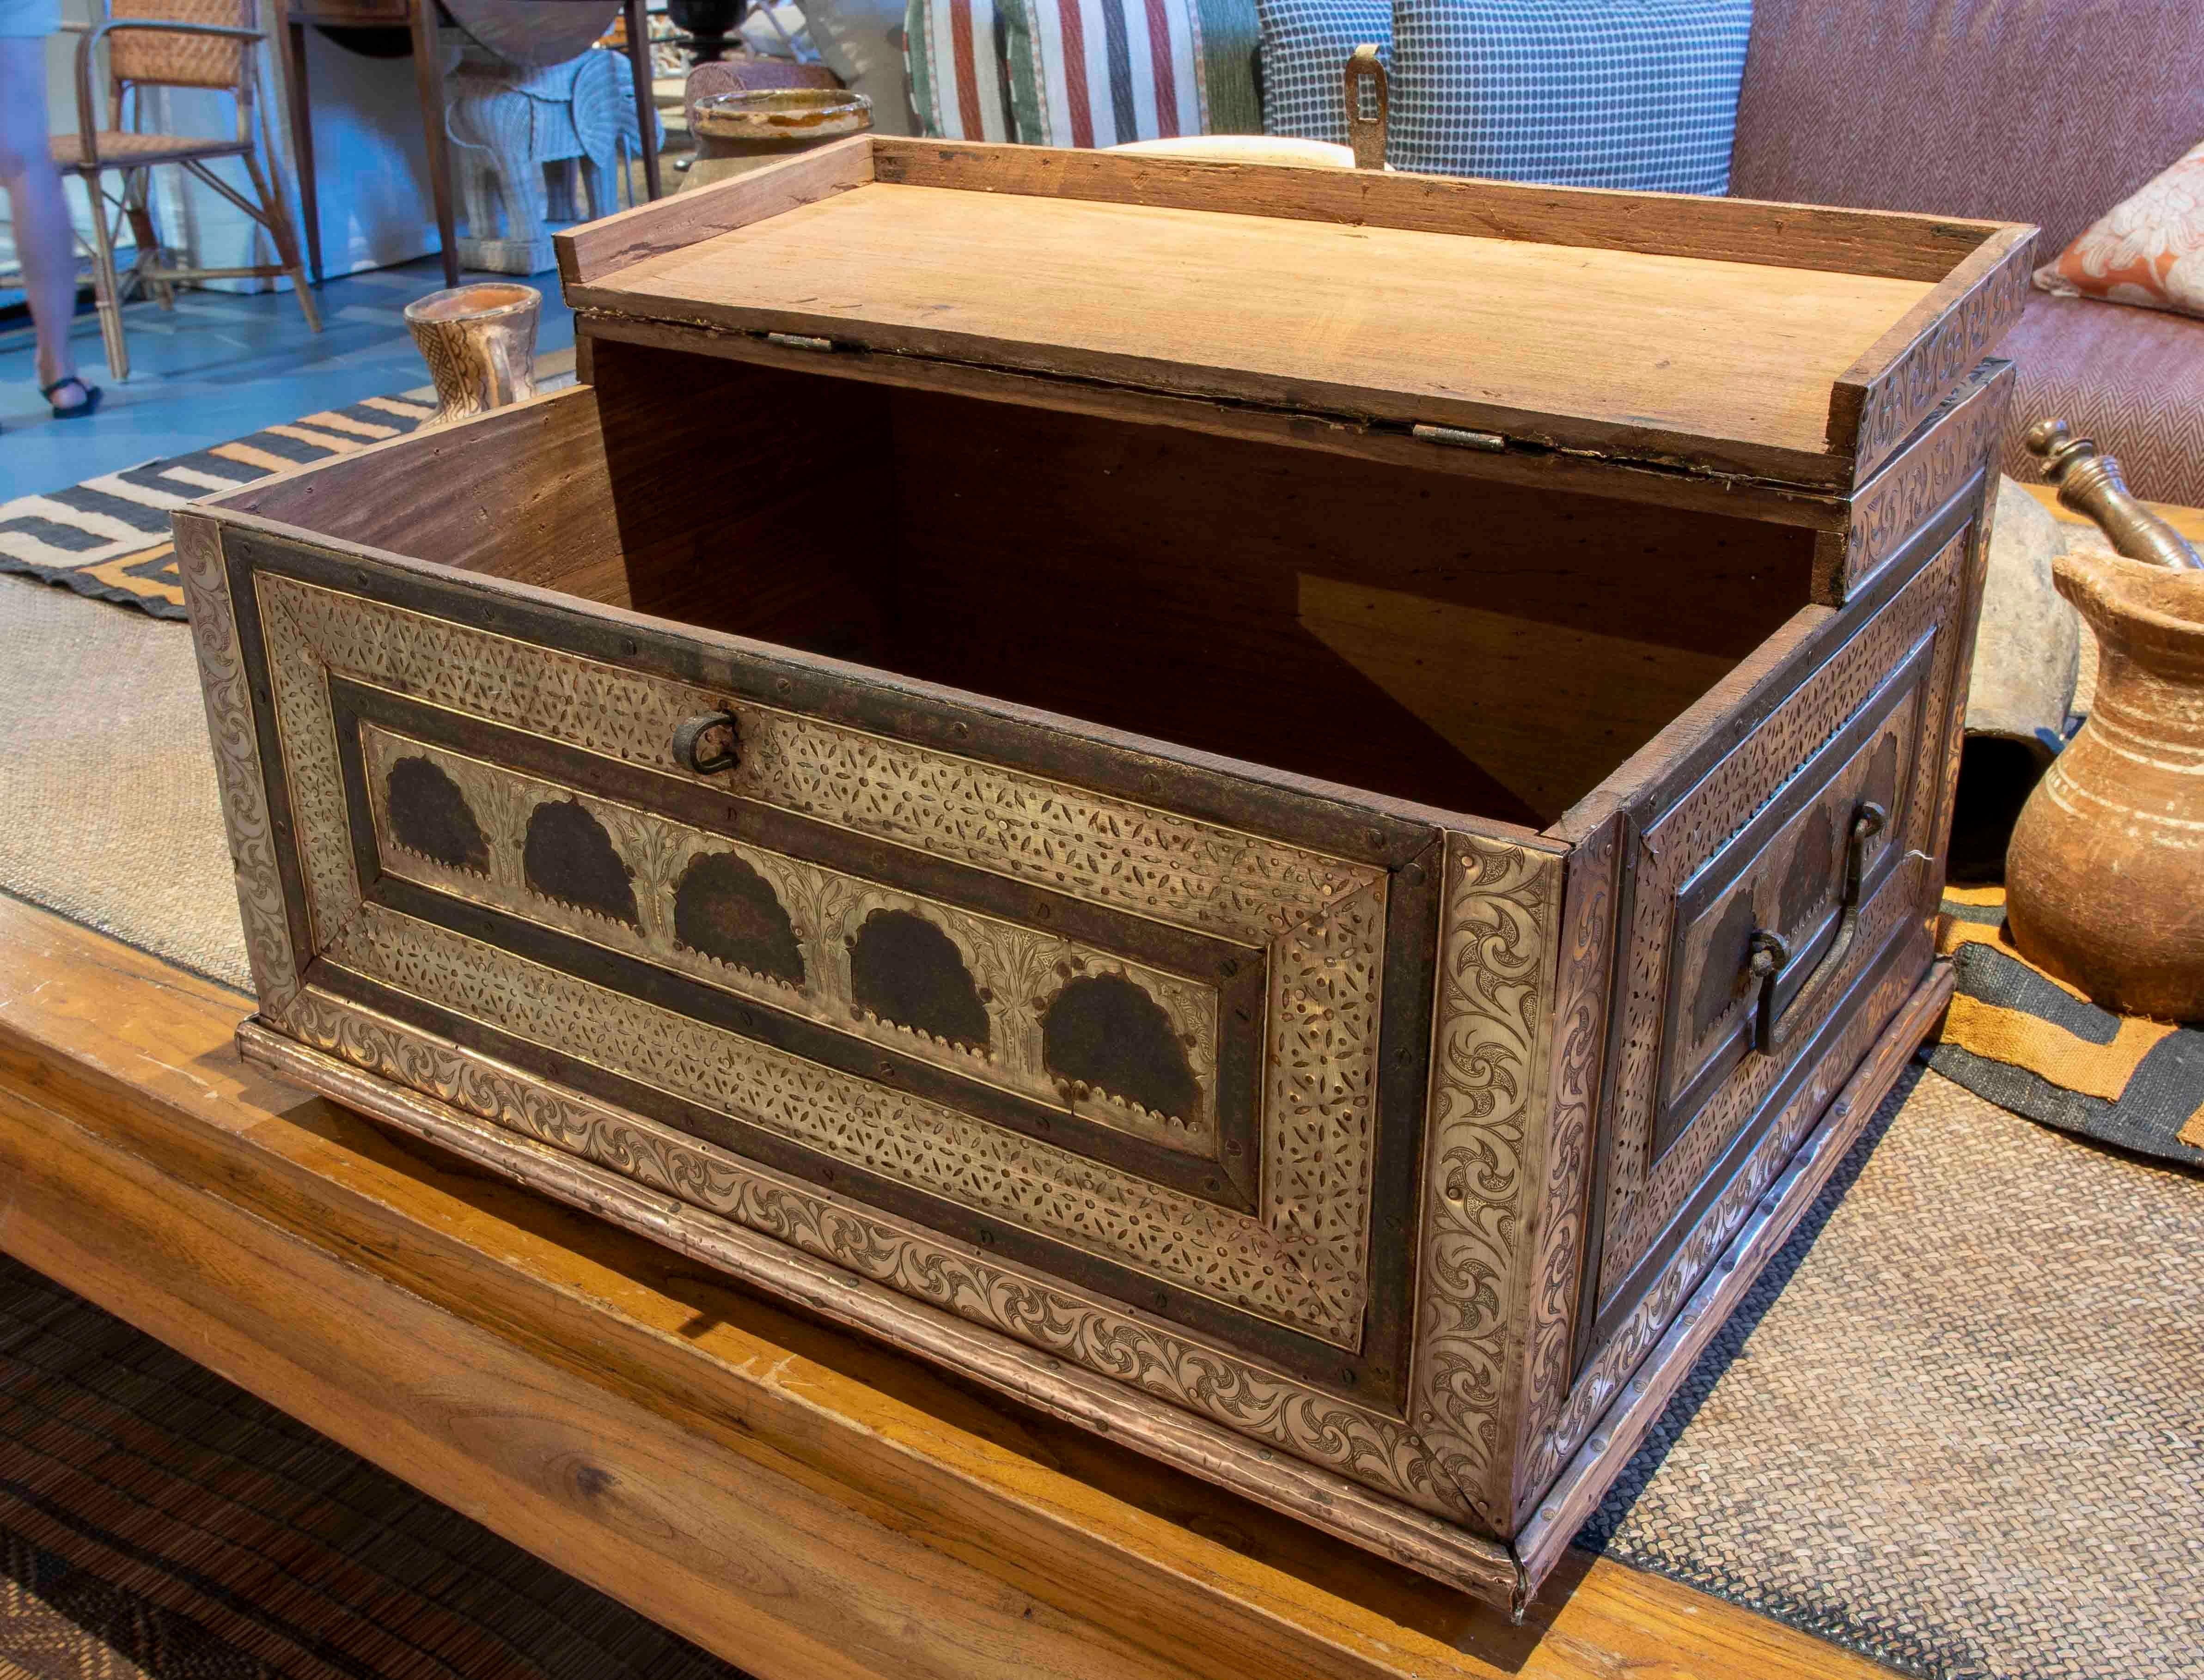 19th Century Indian Chest with Wooden Frame Covered in Embossed Brass with Handles